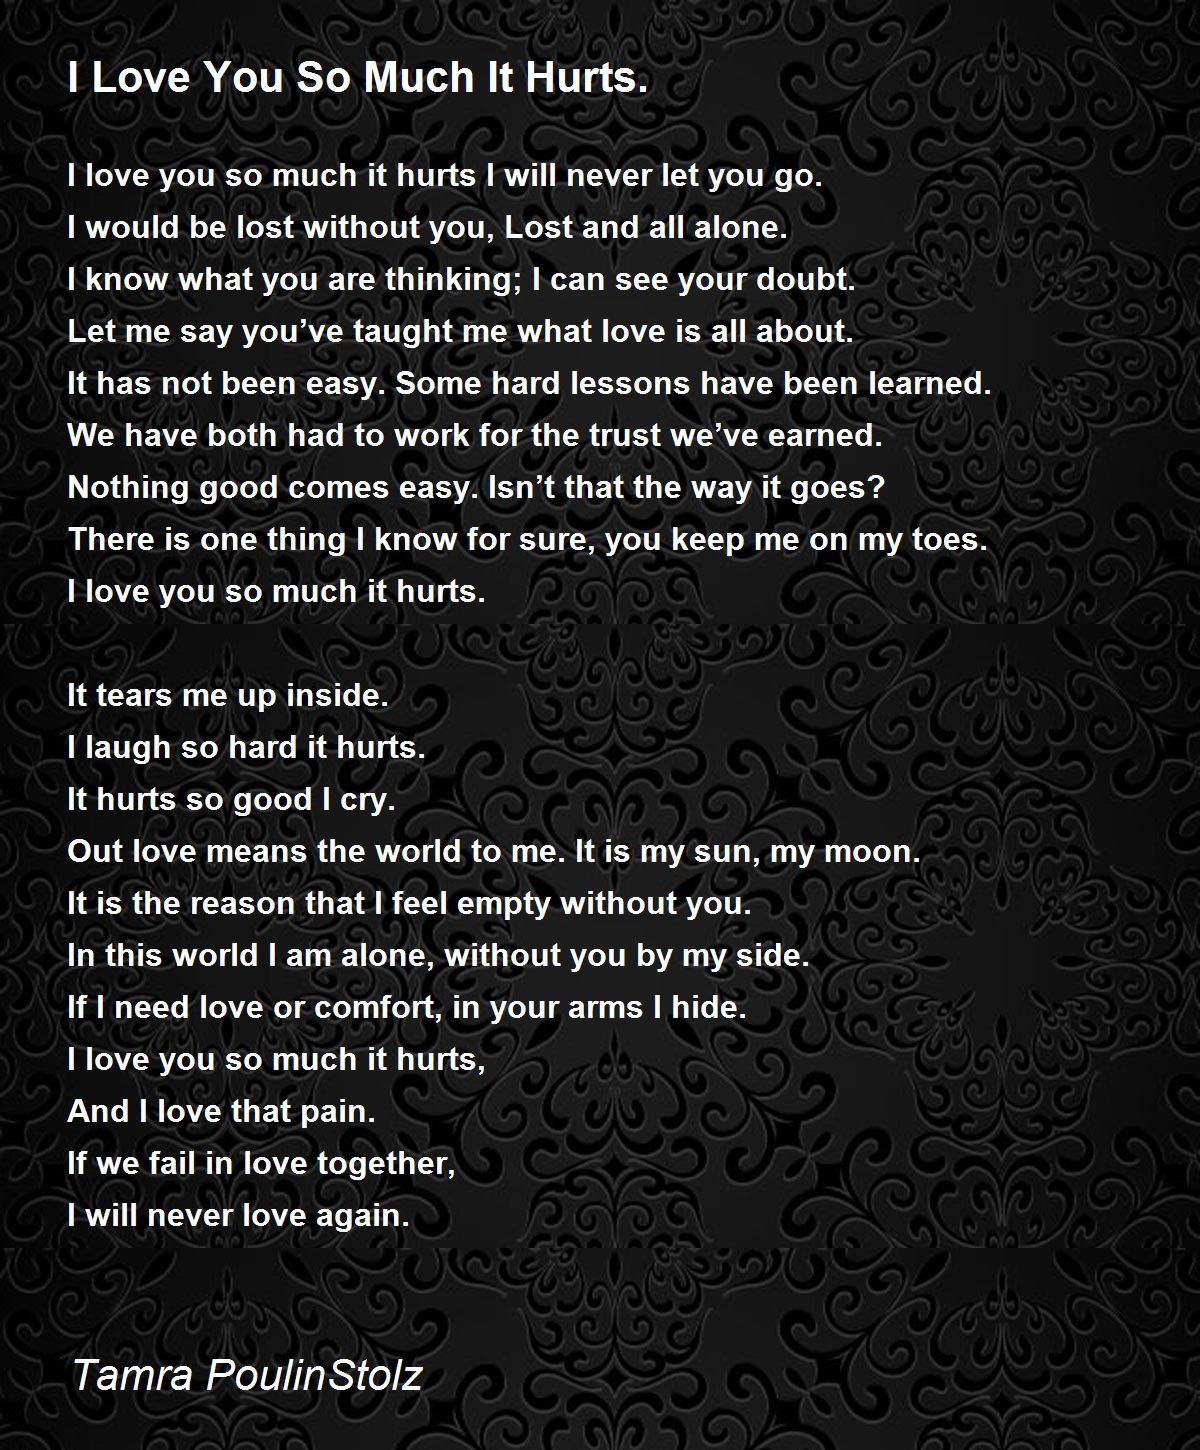 I Love You So Much It Hurts. - I Love You So Much It Hurts. Poem ...